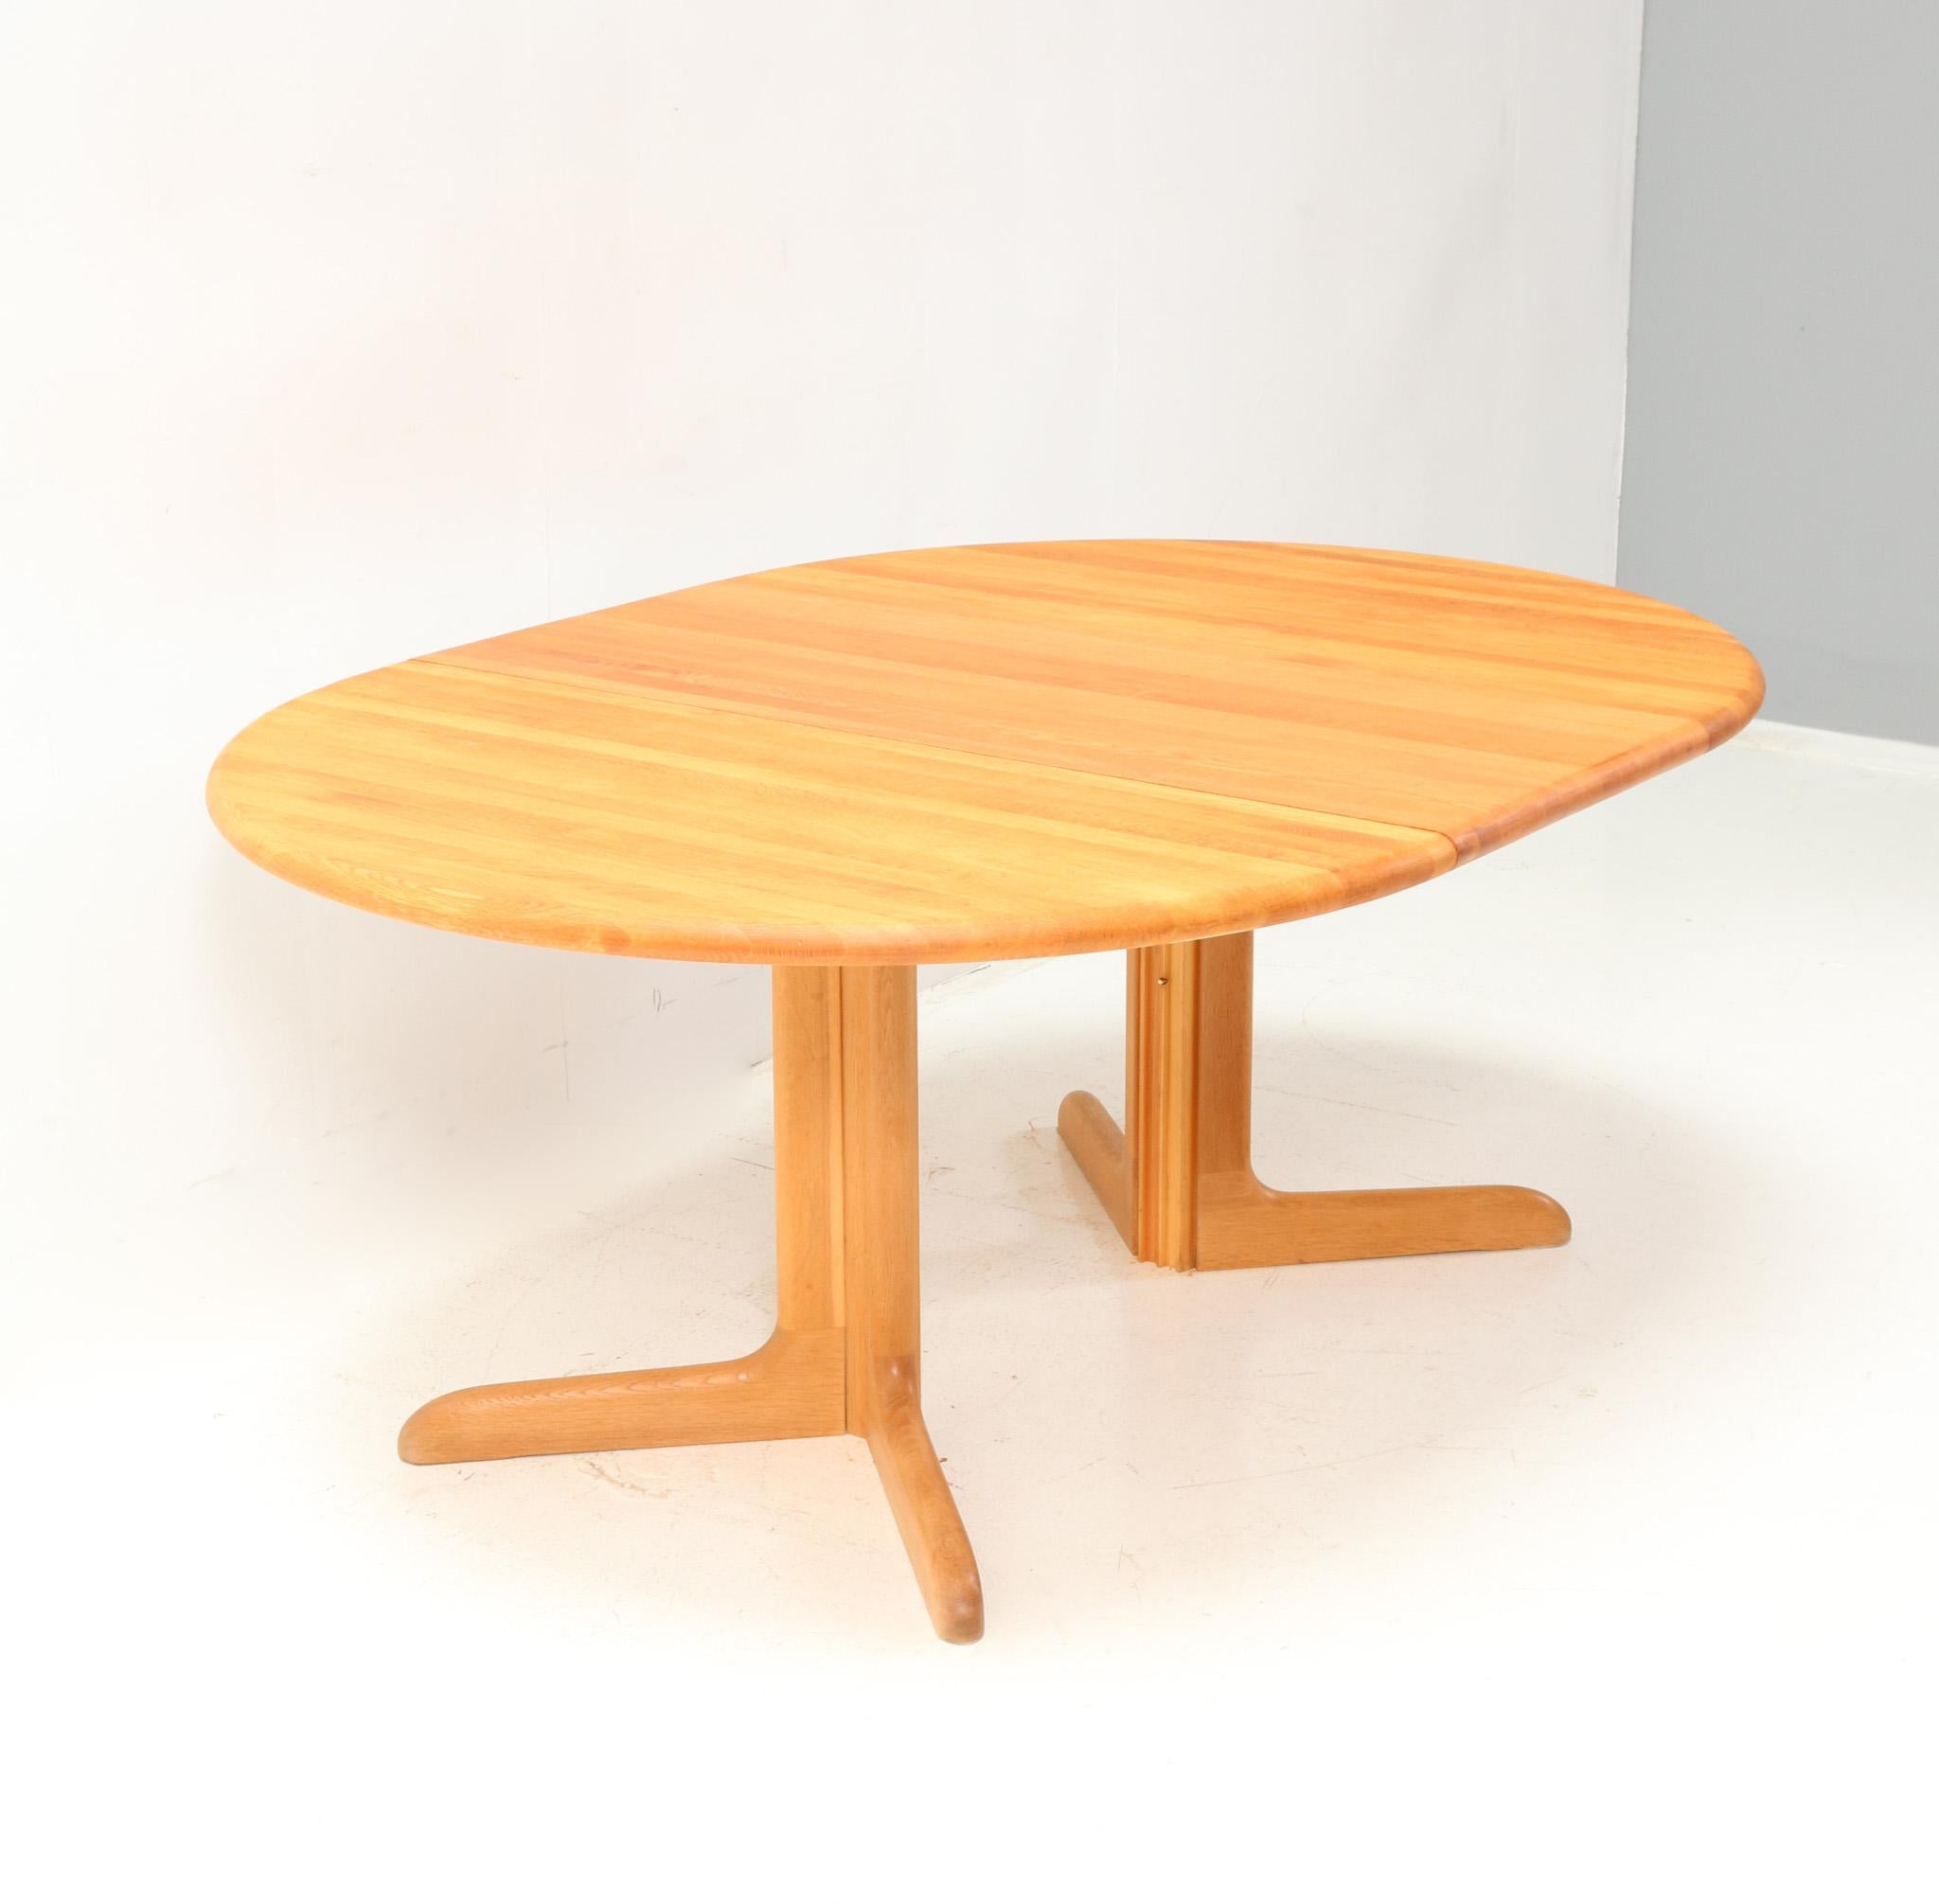  Mid-Century Modern Extendable Dining Room Table by Niels Otto Møller, 1970s For Sale 3